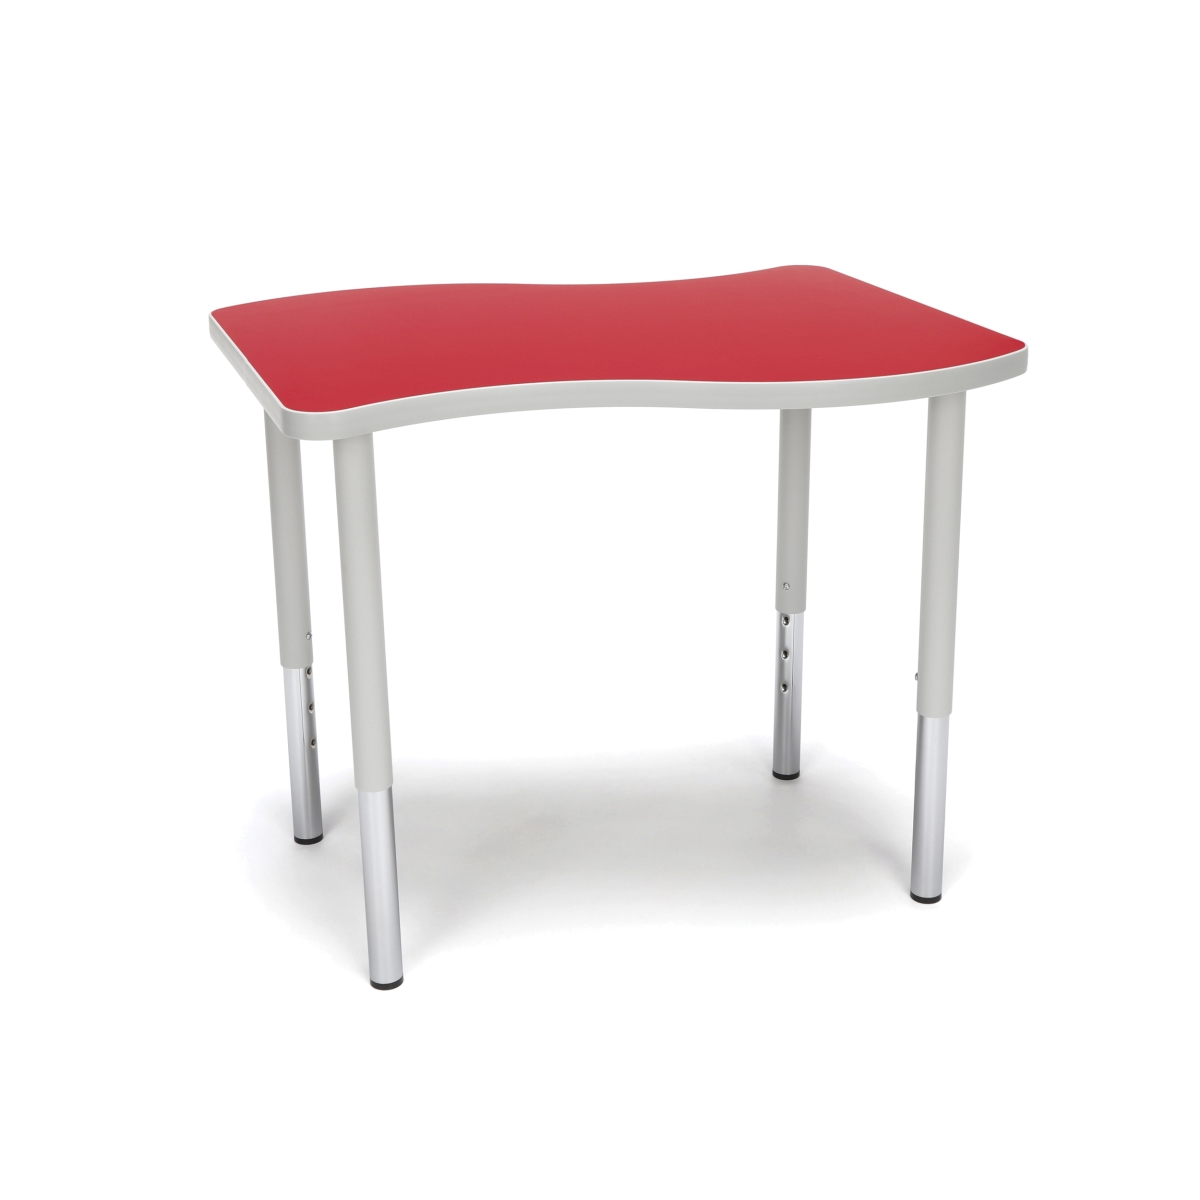 Wave-s-ll-red Adapt Series Small Wave Standard Table - 23-31 In. Height Adjustable Desk, Red